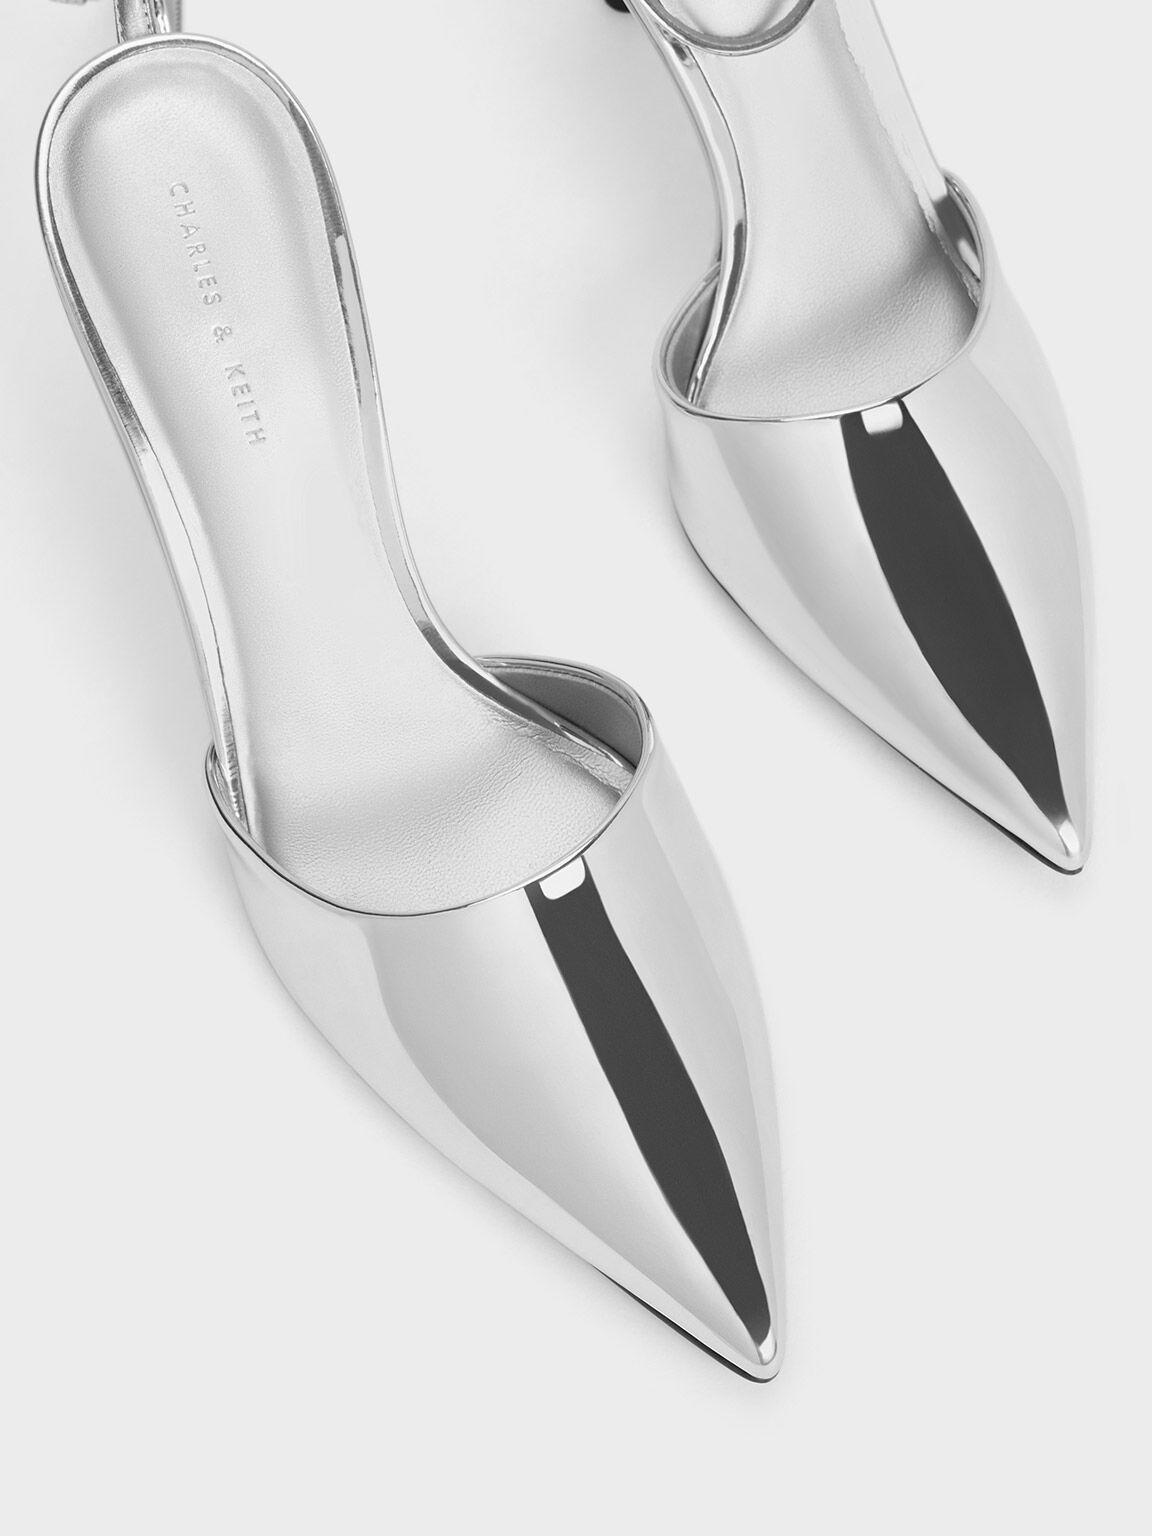 Silver Metallic Patent Pointed-Toe Ankle-Strap Pumps - CHARLES & KEITH US